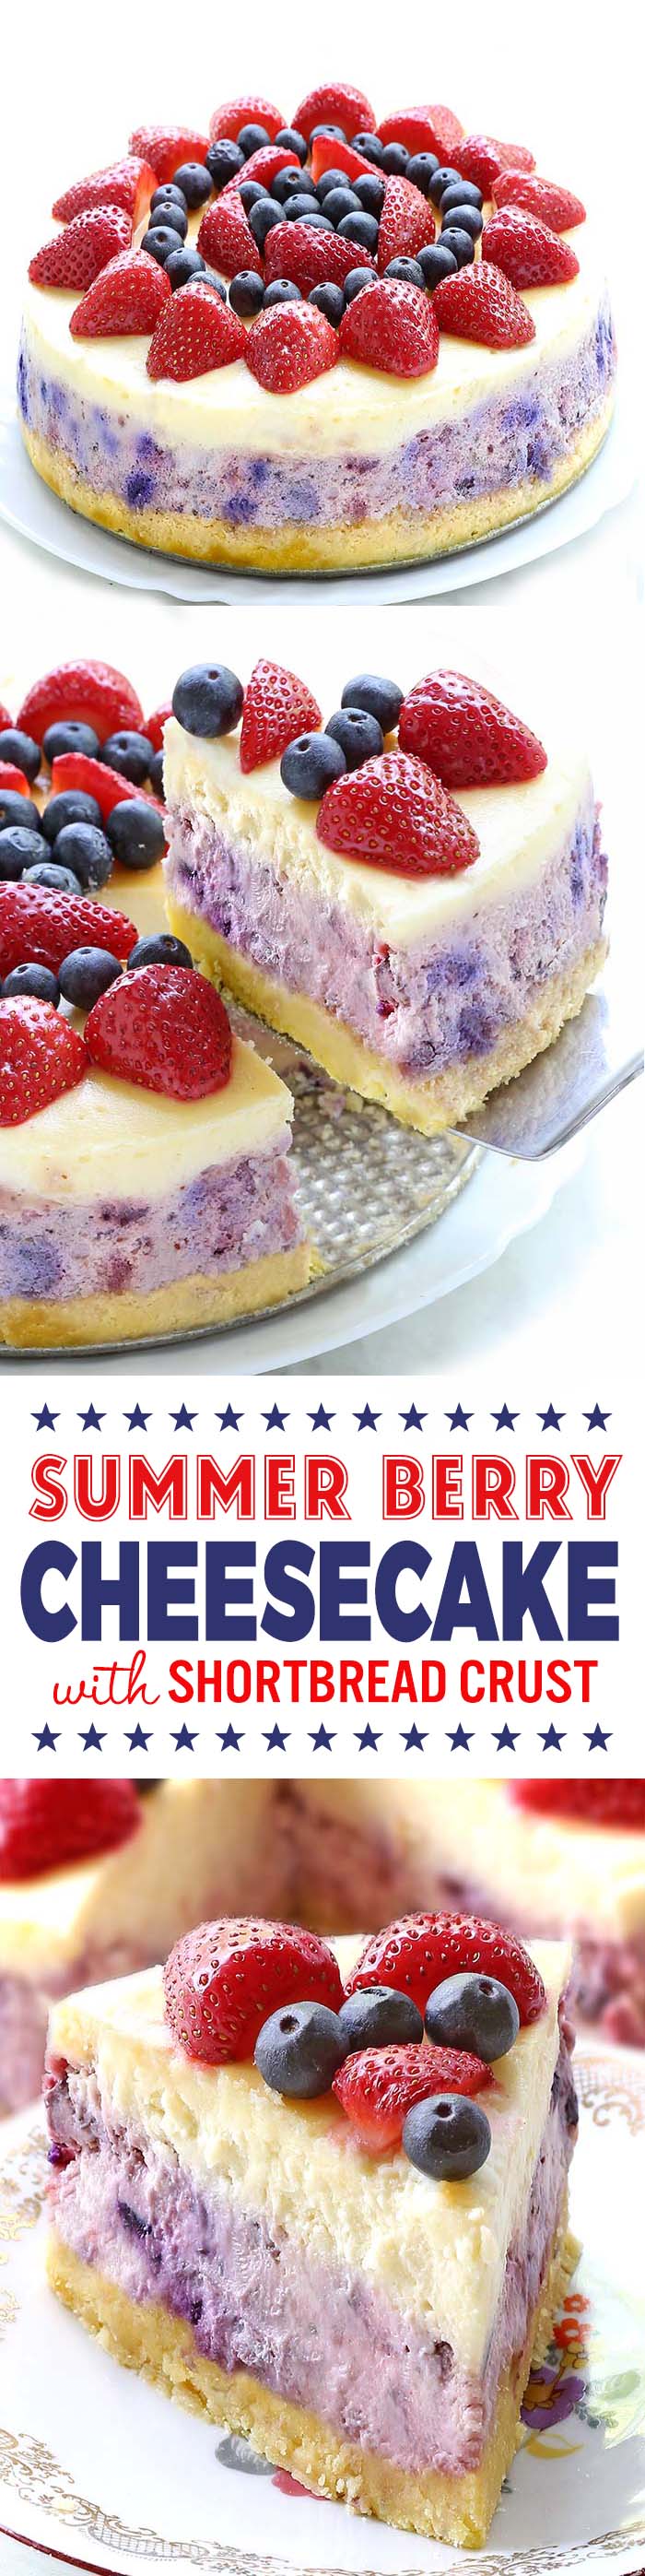 There’s never a bad reason to have cheesecake, and this Summer Berry Cheesecake is perfect any day of the year, but especially right now as you’re planning out your Memorial Day or fourth of July barbecues and picnics.